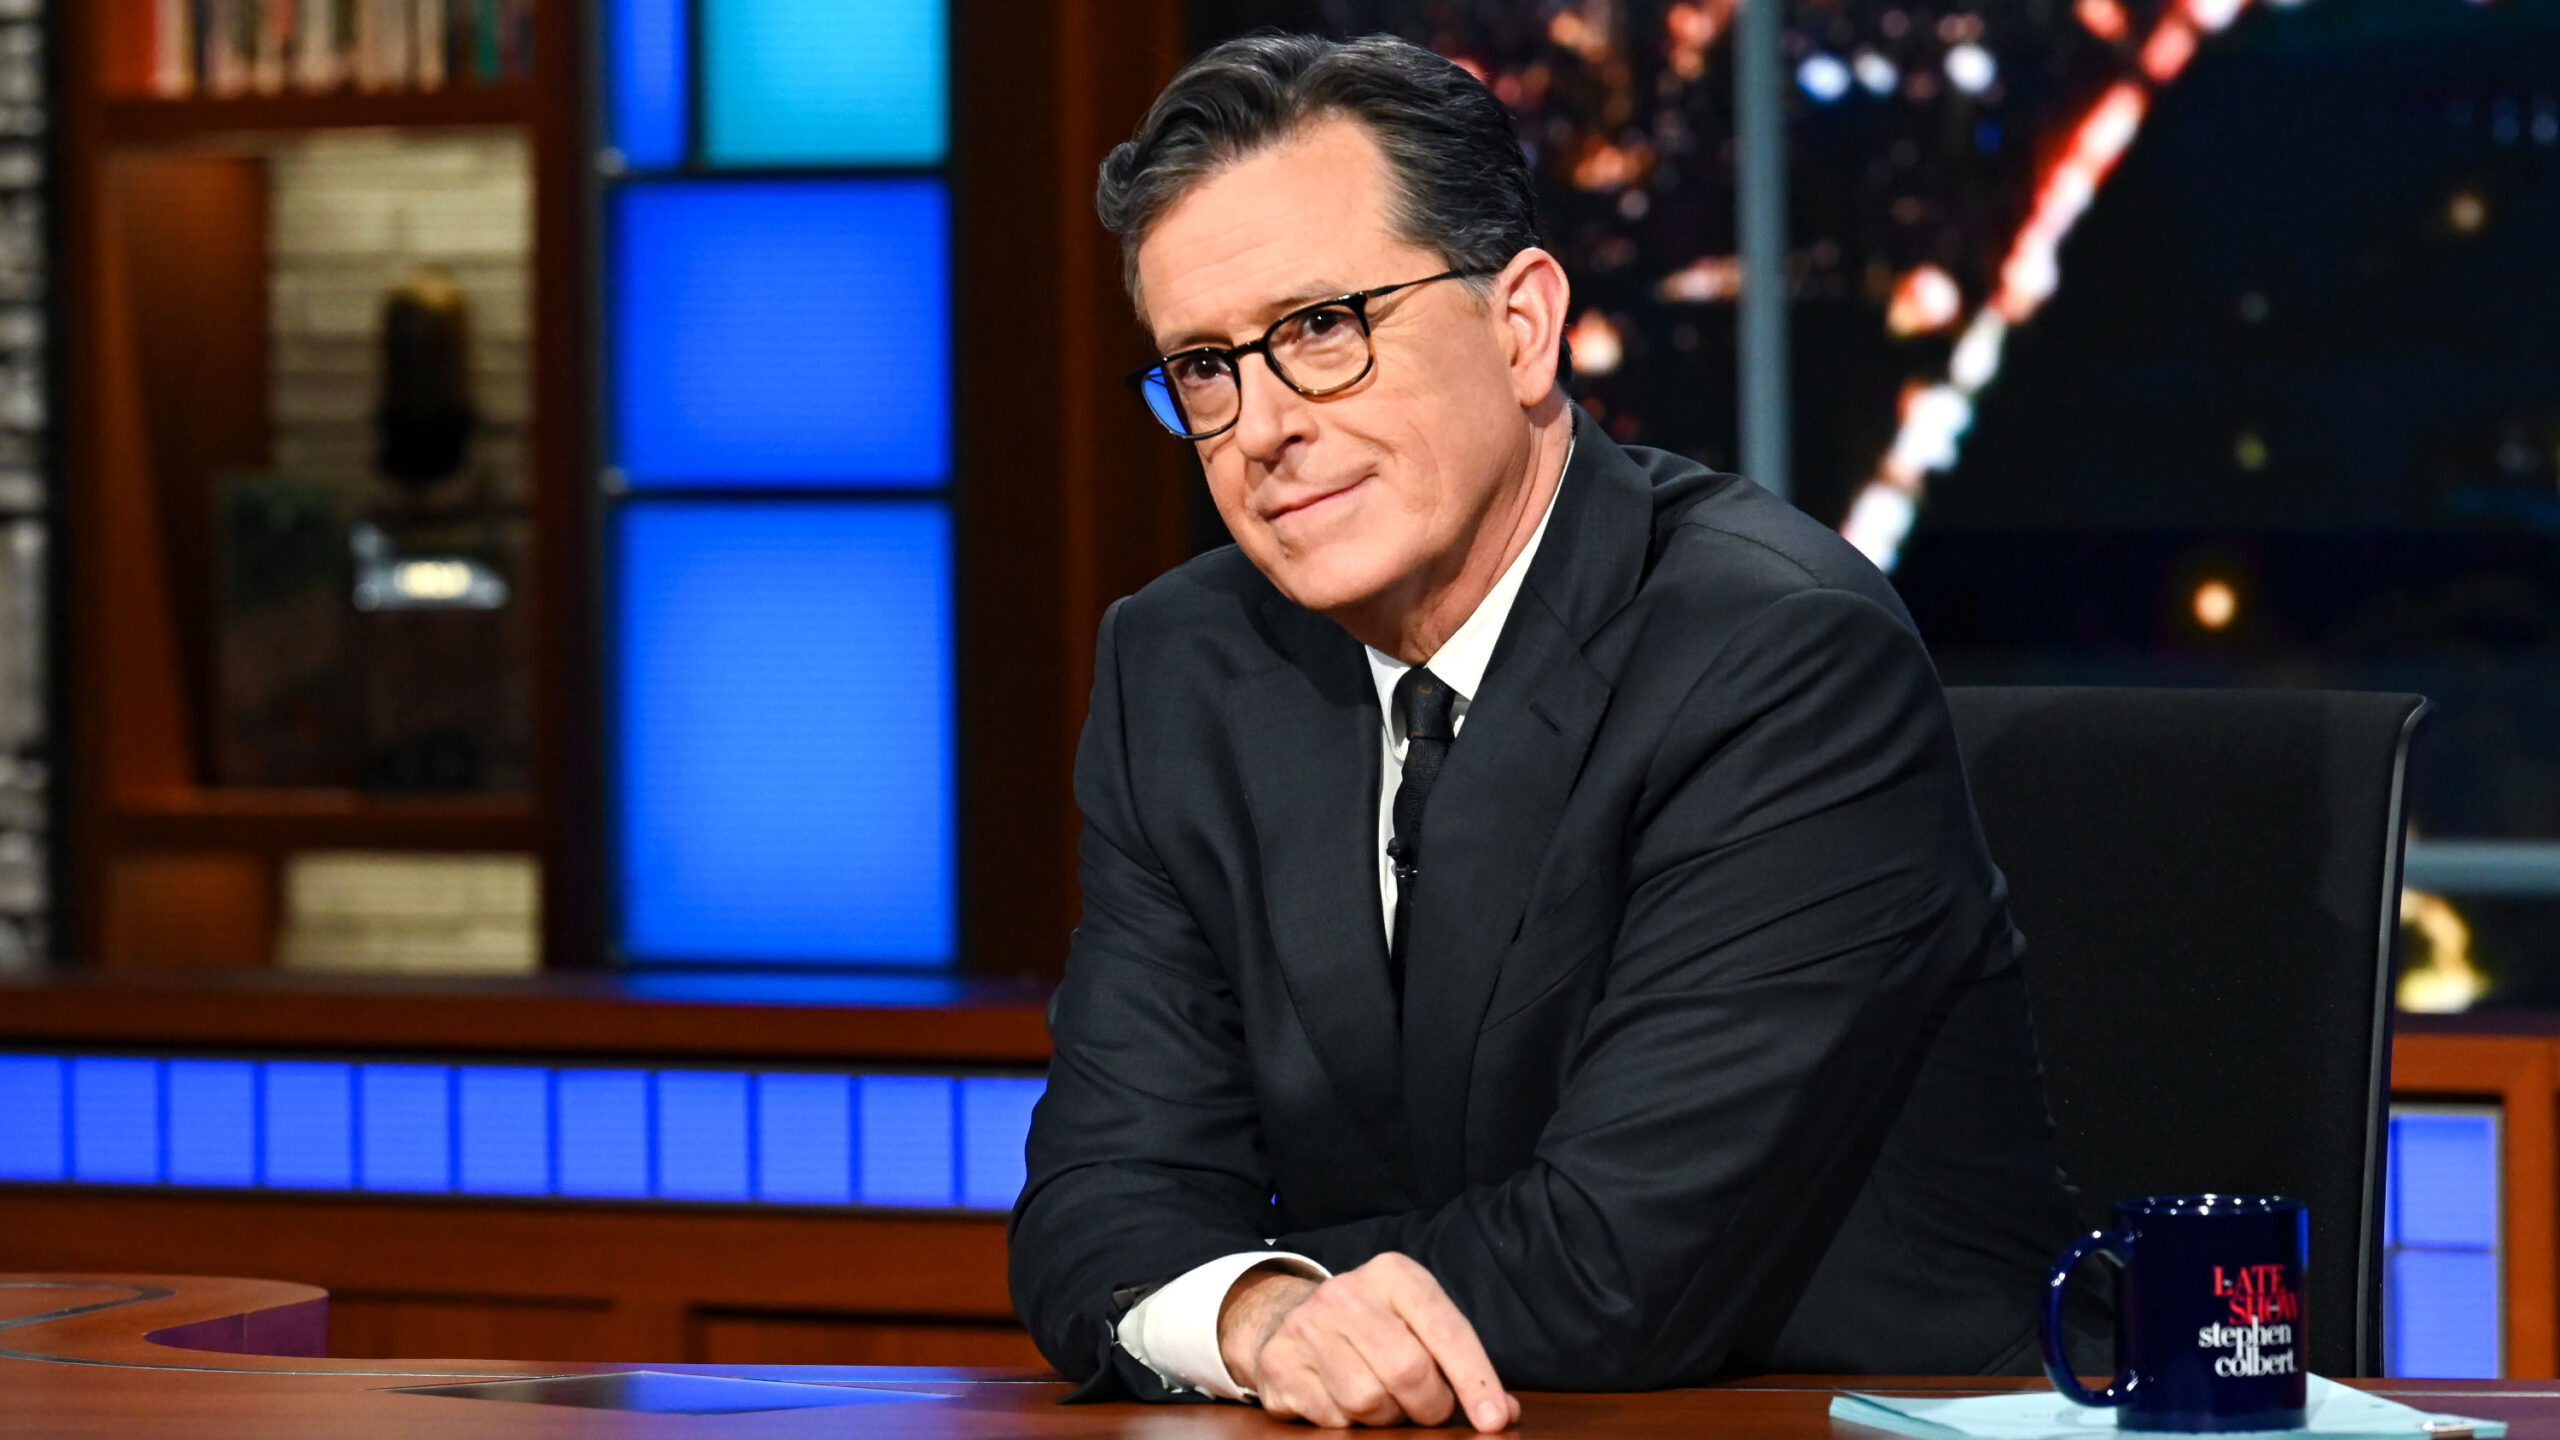 Late night shows by Colbert, Kimmel, and Fallon stop due to screenwriter strike.